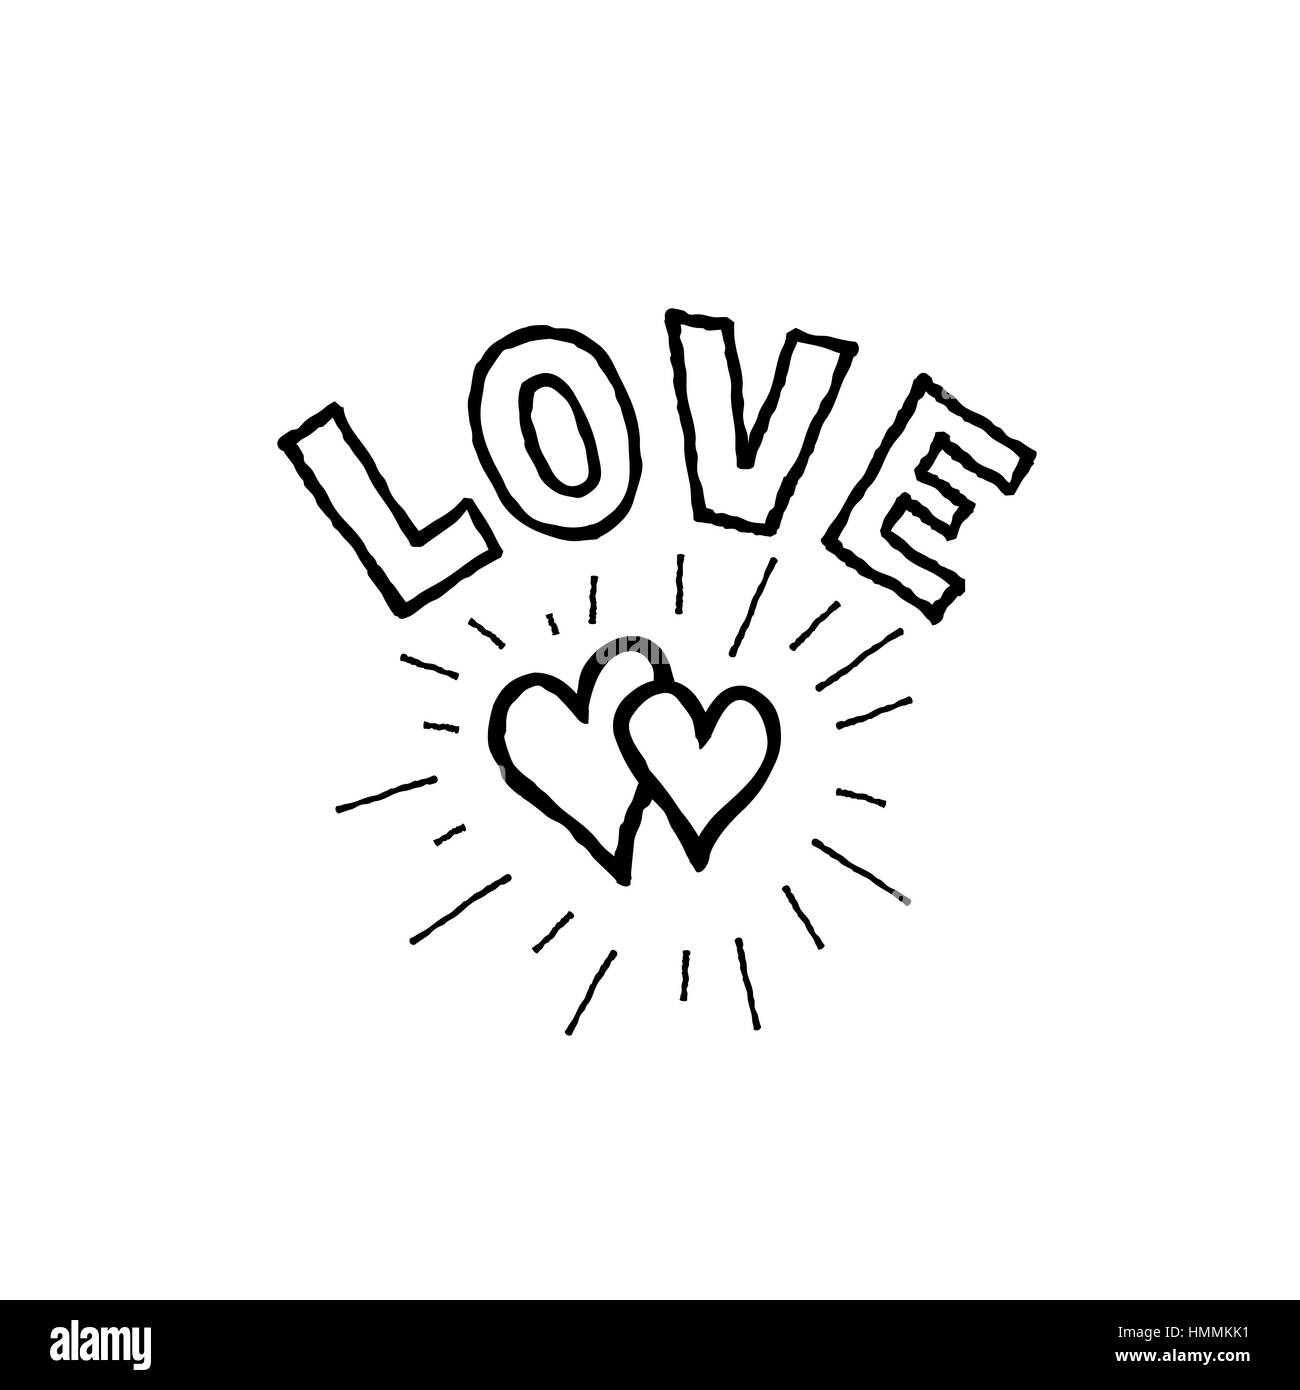 Doodle love hearts with handwritten lettering LOVE. Back and white Valentine's day holiday ornamental decor element. Good for greeting card, tatoo des Stock Vector